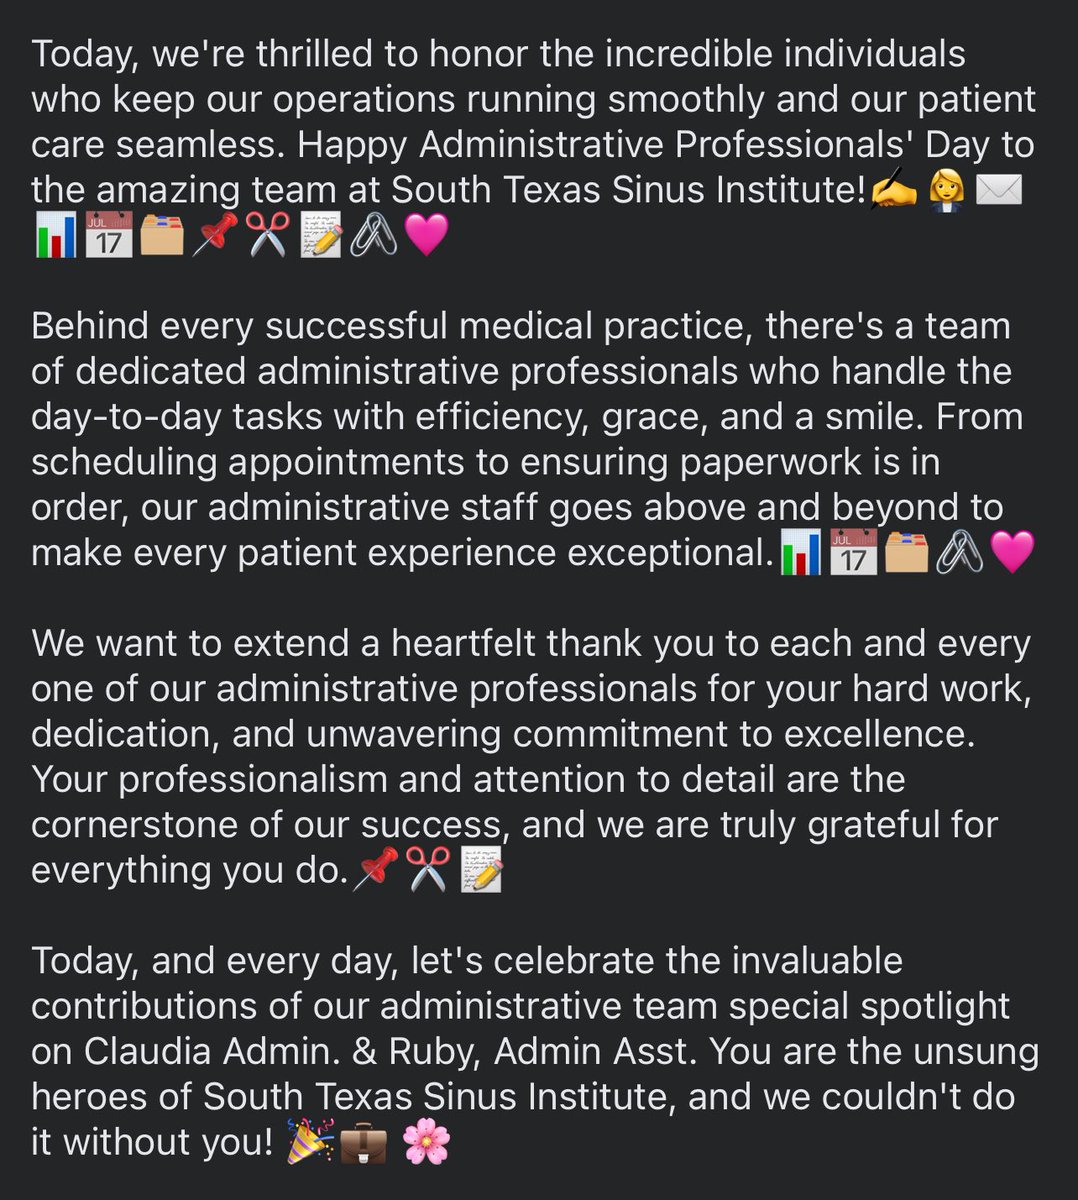 🌟 Celebrating Our Backbone: Administrative Professionals' Day at South Texas Sinus Institute! 🌟

#AdminProfessionalsDay #TeamAppreciation #ThankYou #drvincenthonrubia #rgvdoctors #Innovation #TeamEngagement #employeeappreciation #AdministrativeProfessionalsDay